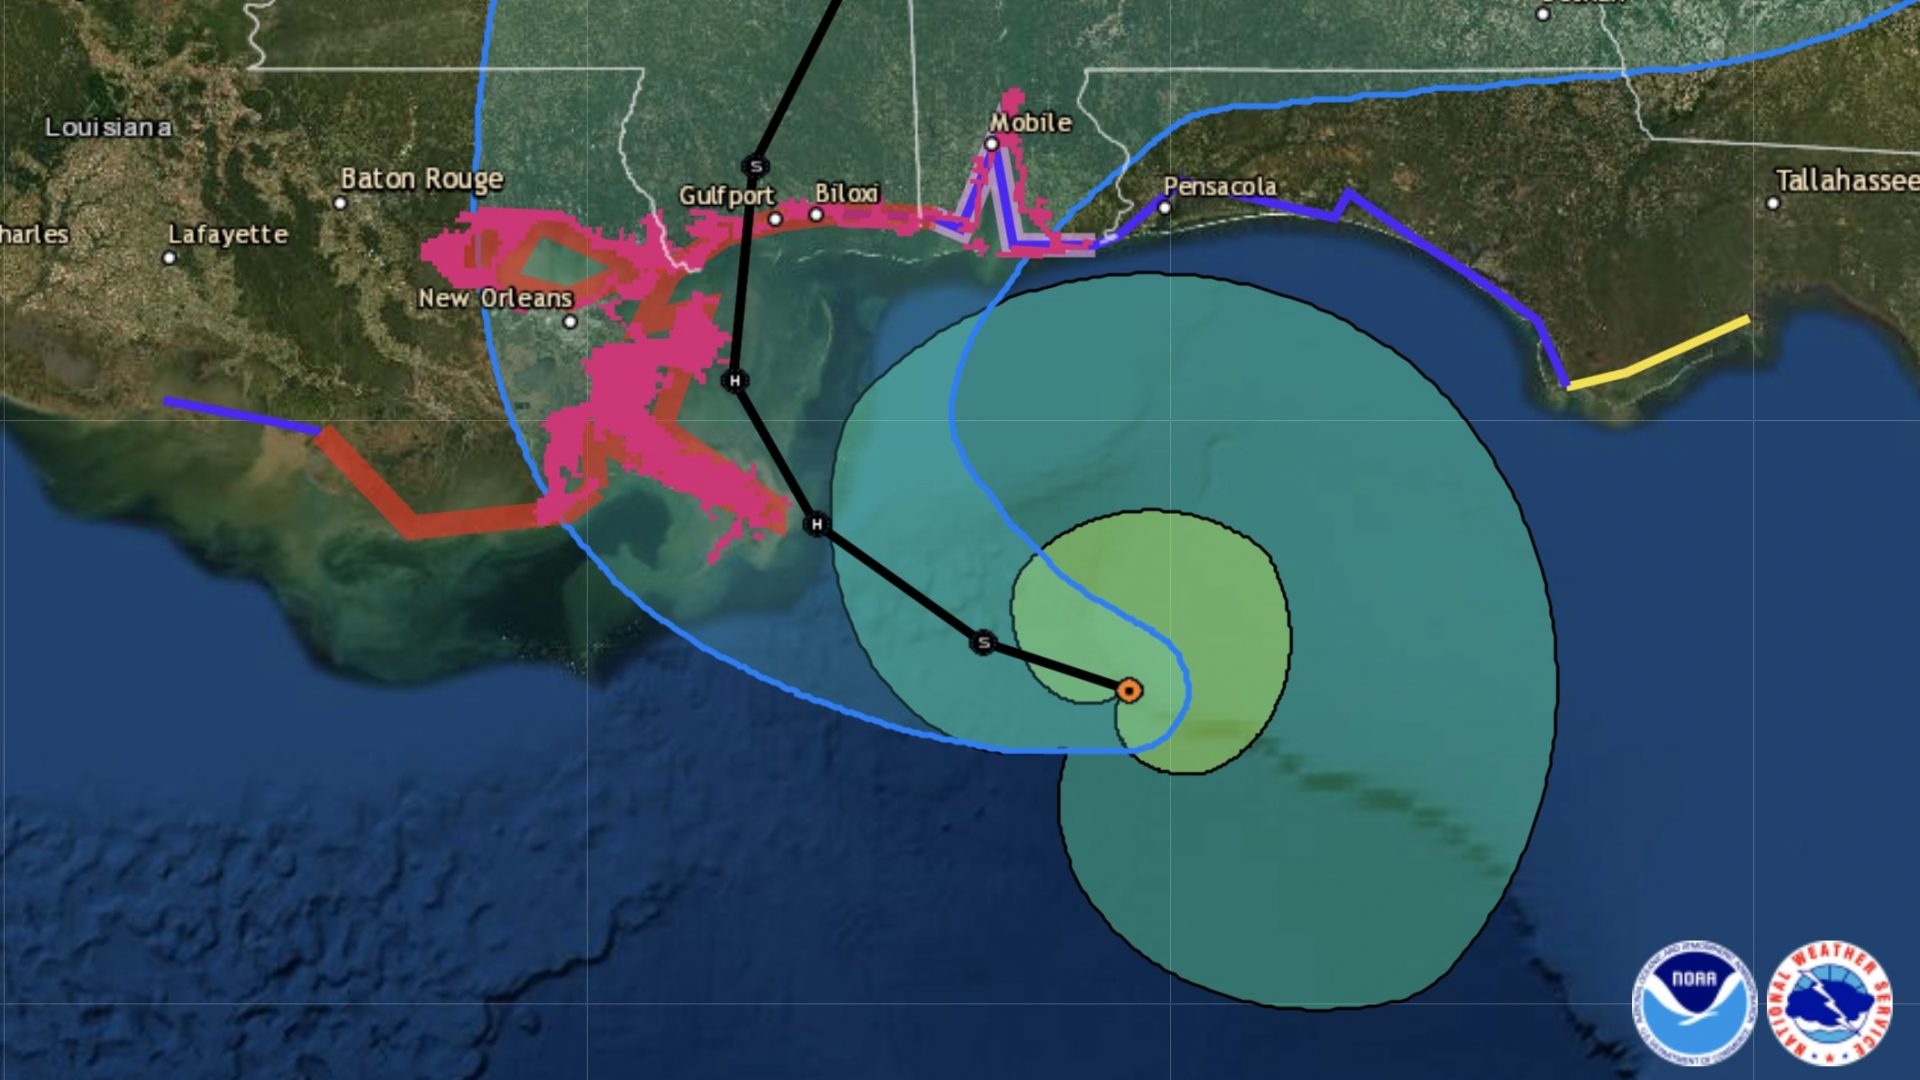 Sally is currently forecast to make landfall on the Gulf Coast as a hurricane, possibly in the area east of Gulfport, Miss.